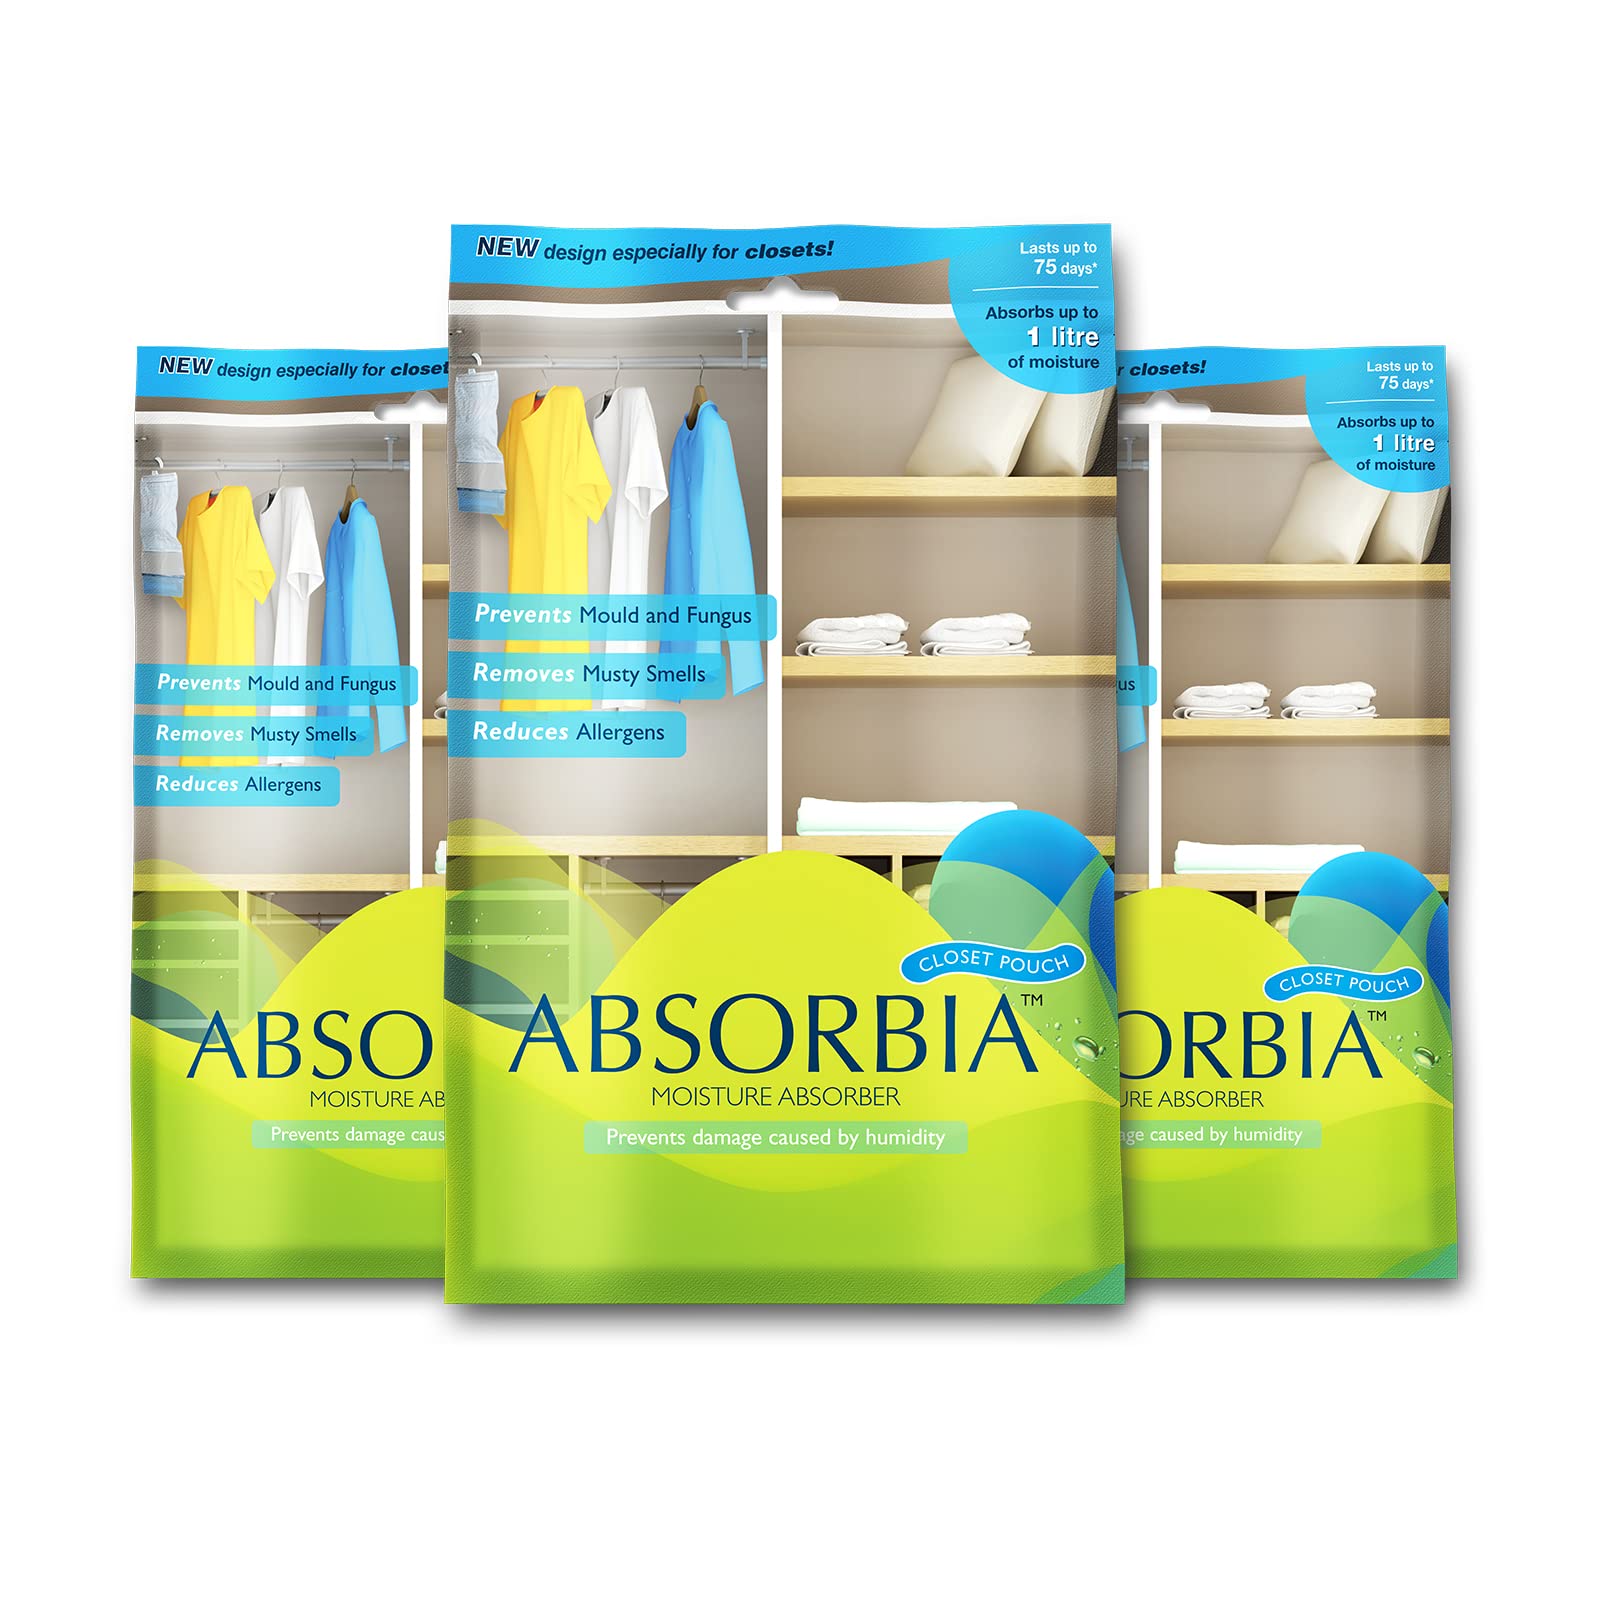 Absorbia Moisture Absorber|Absorbia Hanging Pouch - Family Pack of 3(440 g X 3 Pouches)| Absorbs 1000ml Each | Dehumidifier for Wardrobe, Closet and Bathroom| Fights Against Moisture, Mould, Fungus